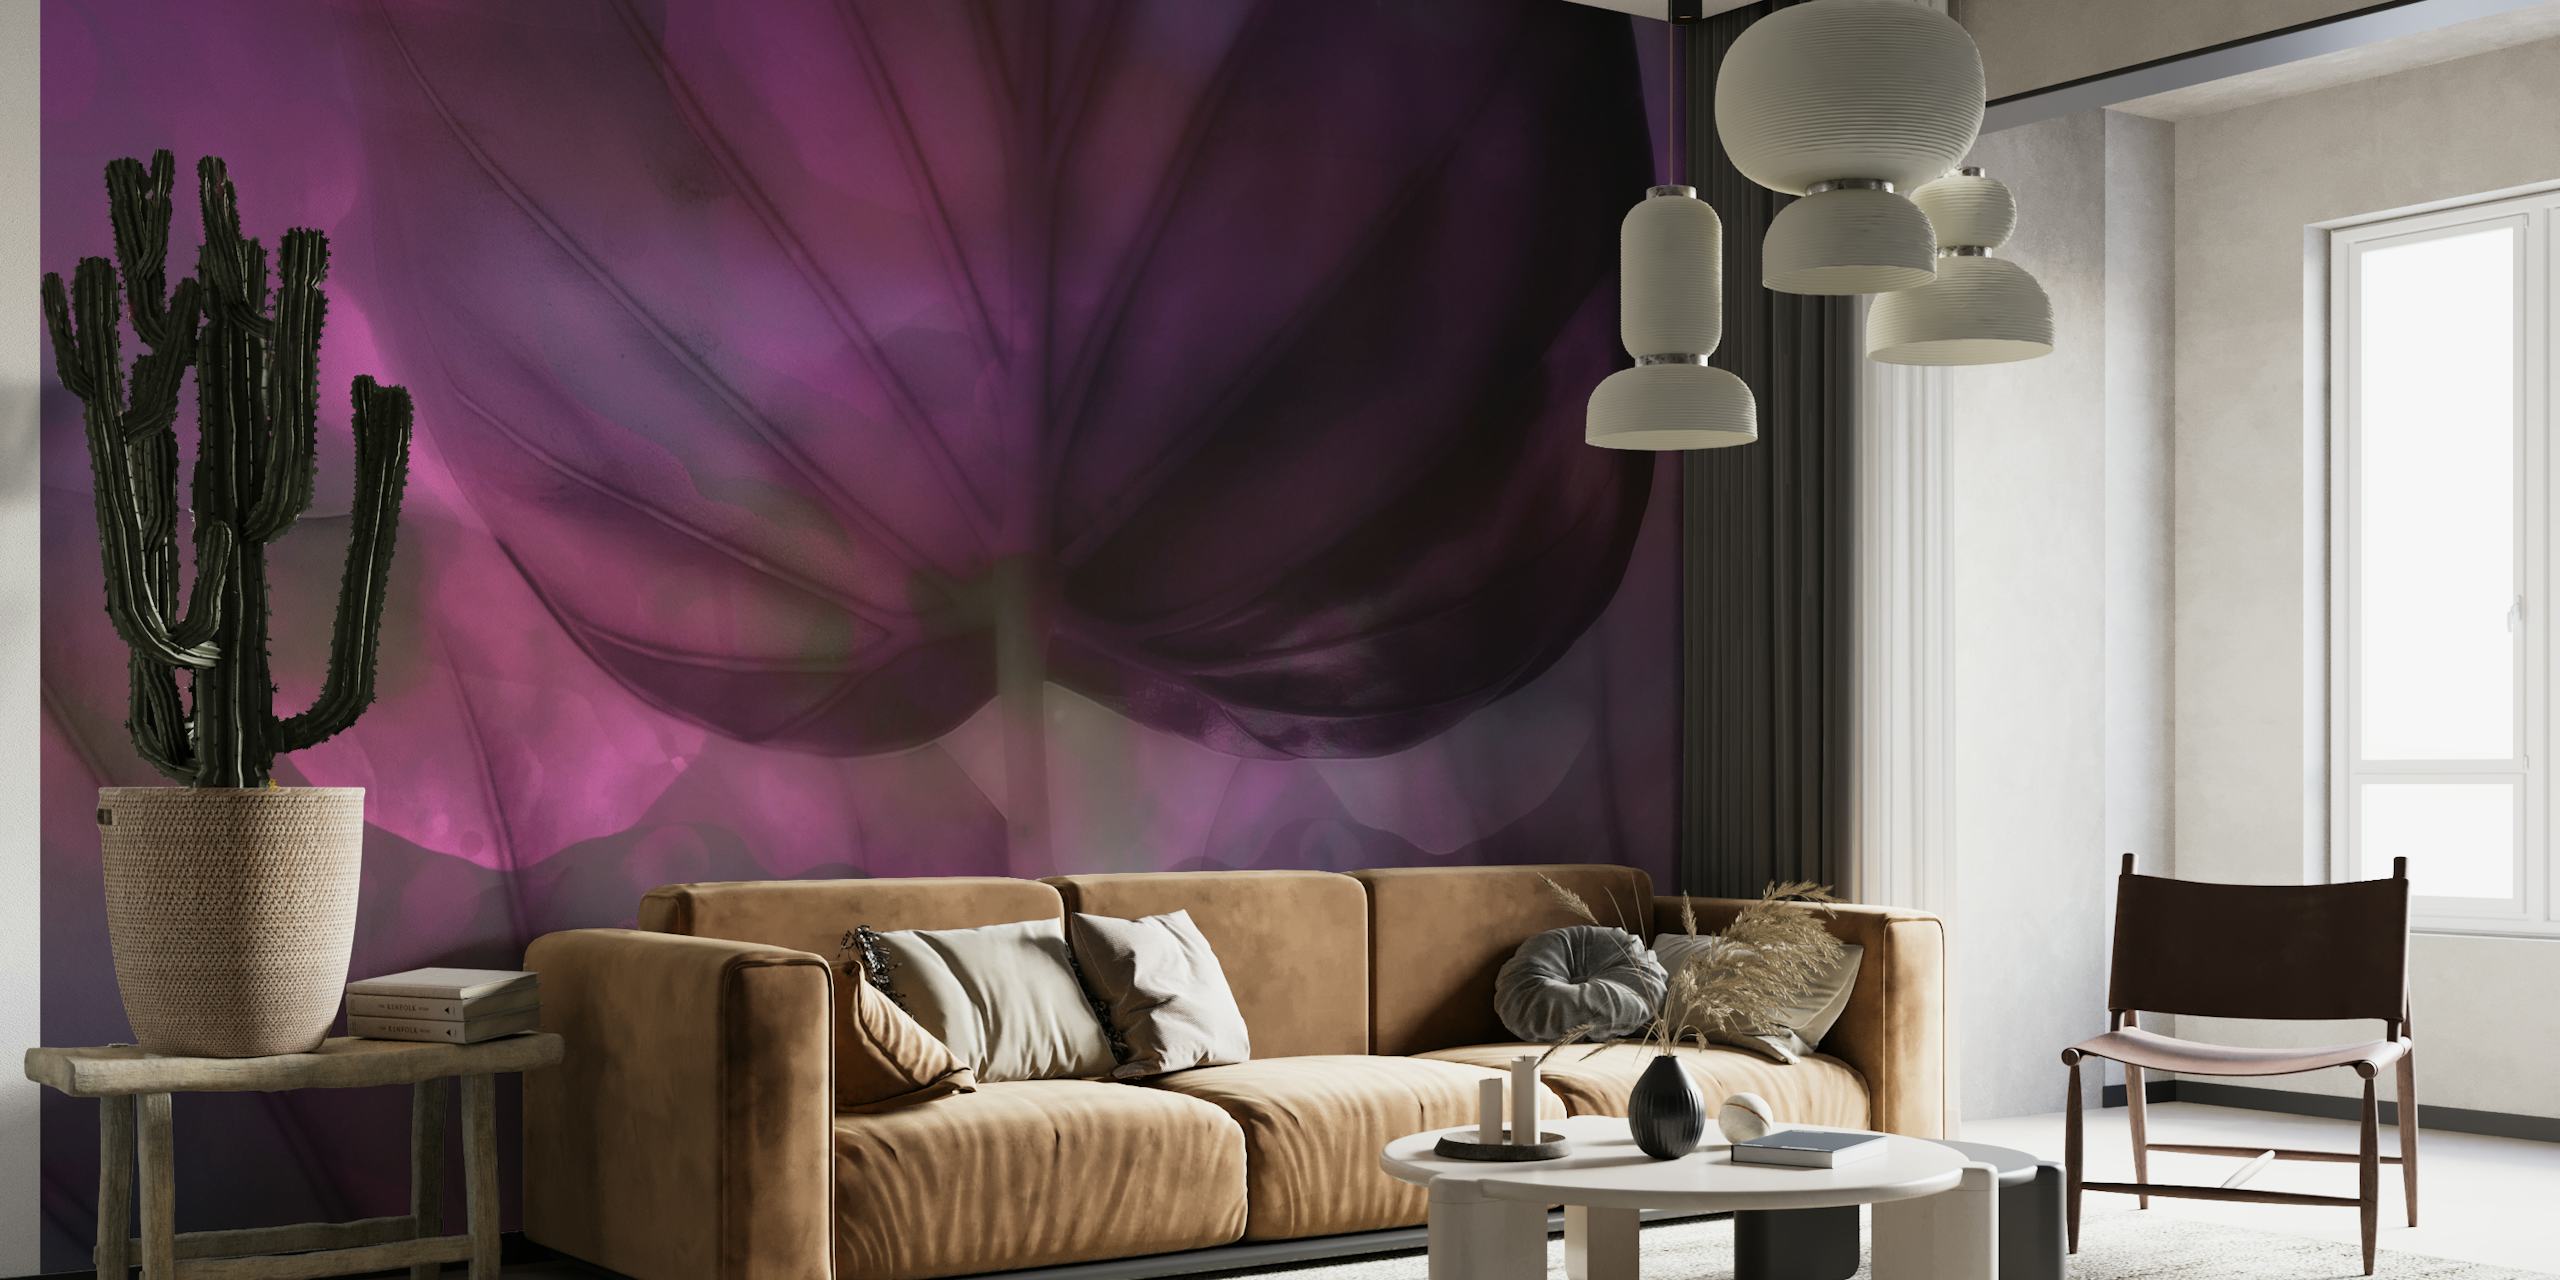 Moody Leaf Abstract Floral wall mural showing a blend of deep purple and grey hues in a fluid art style